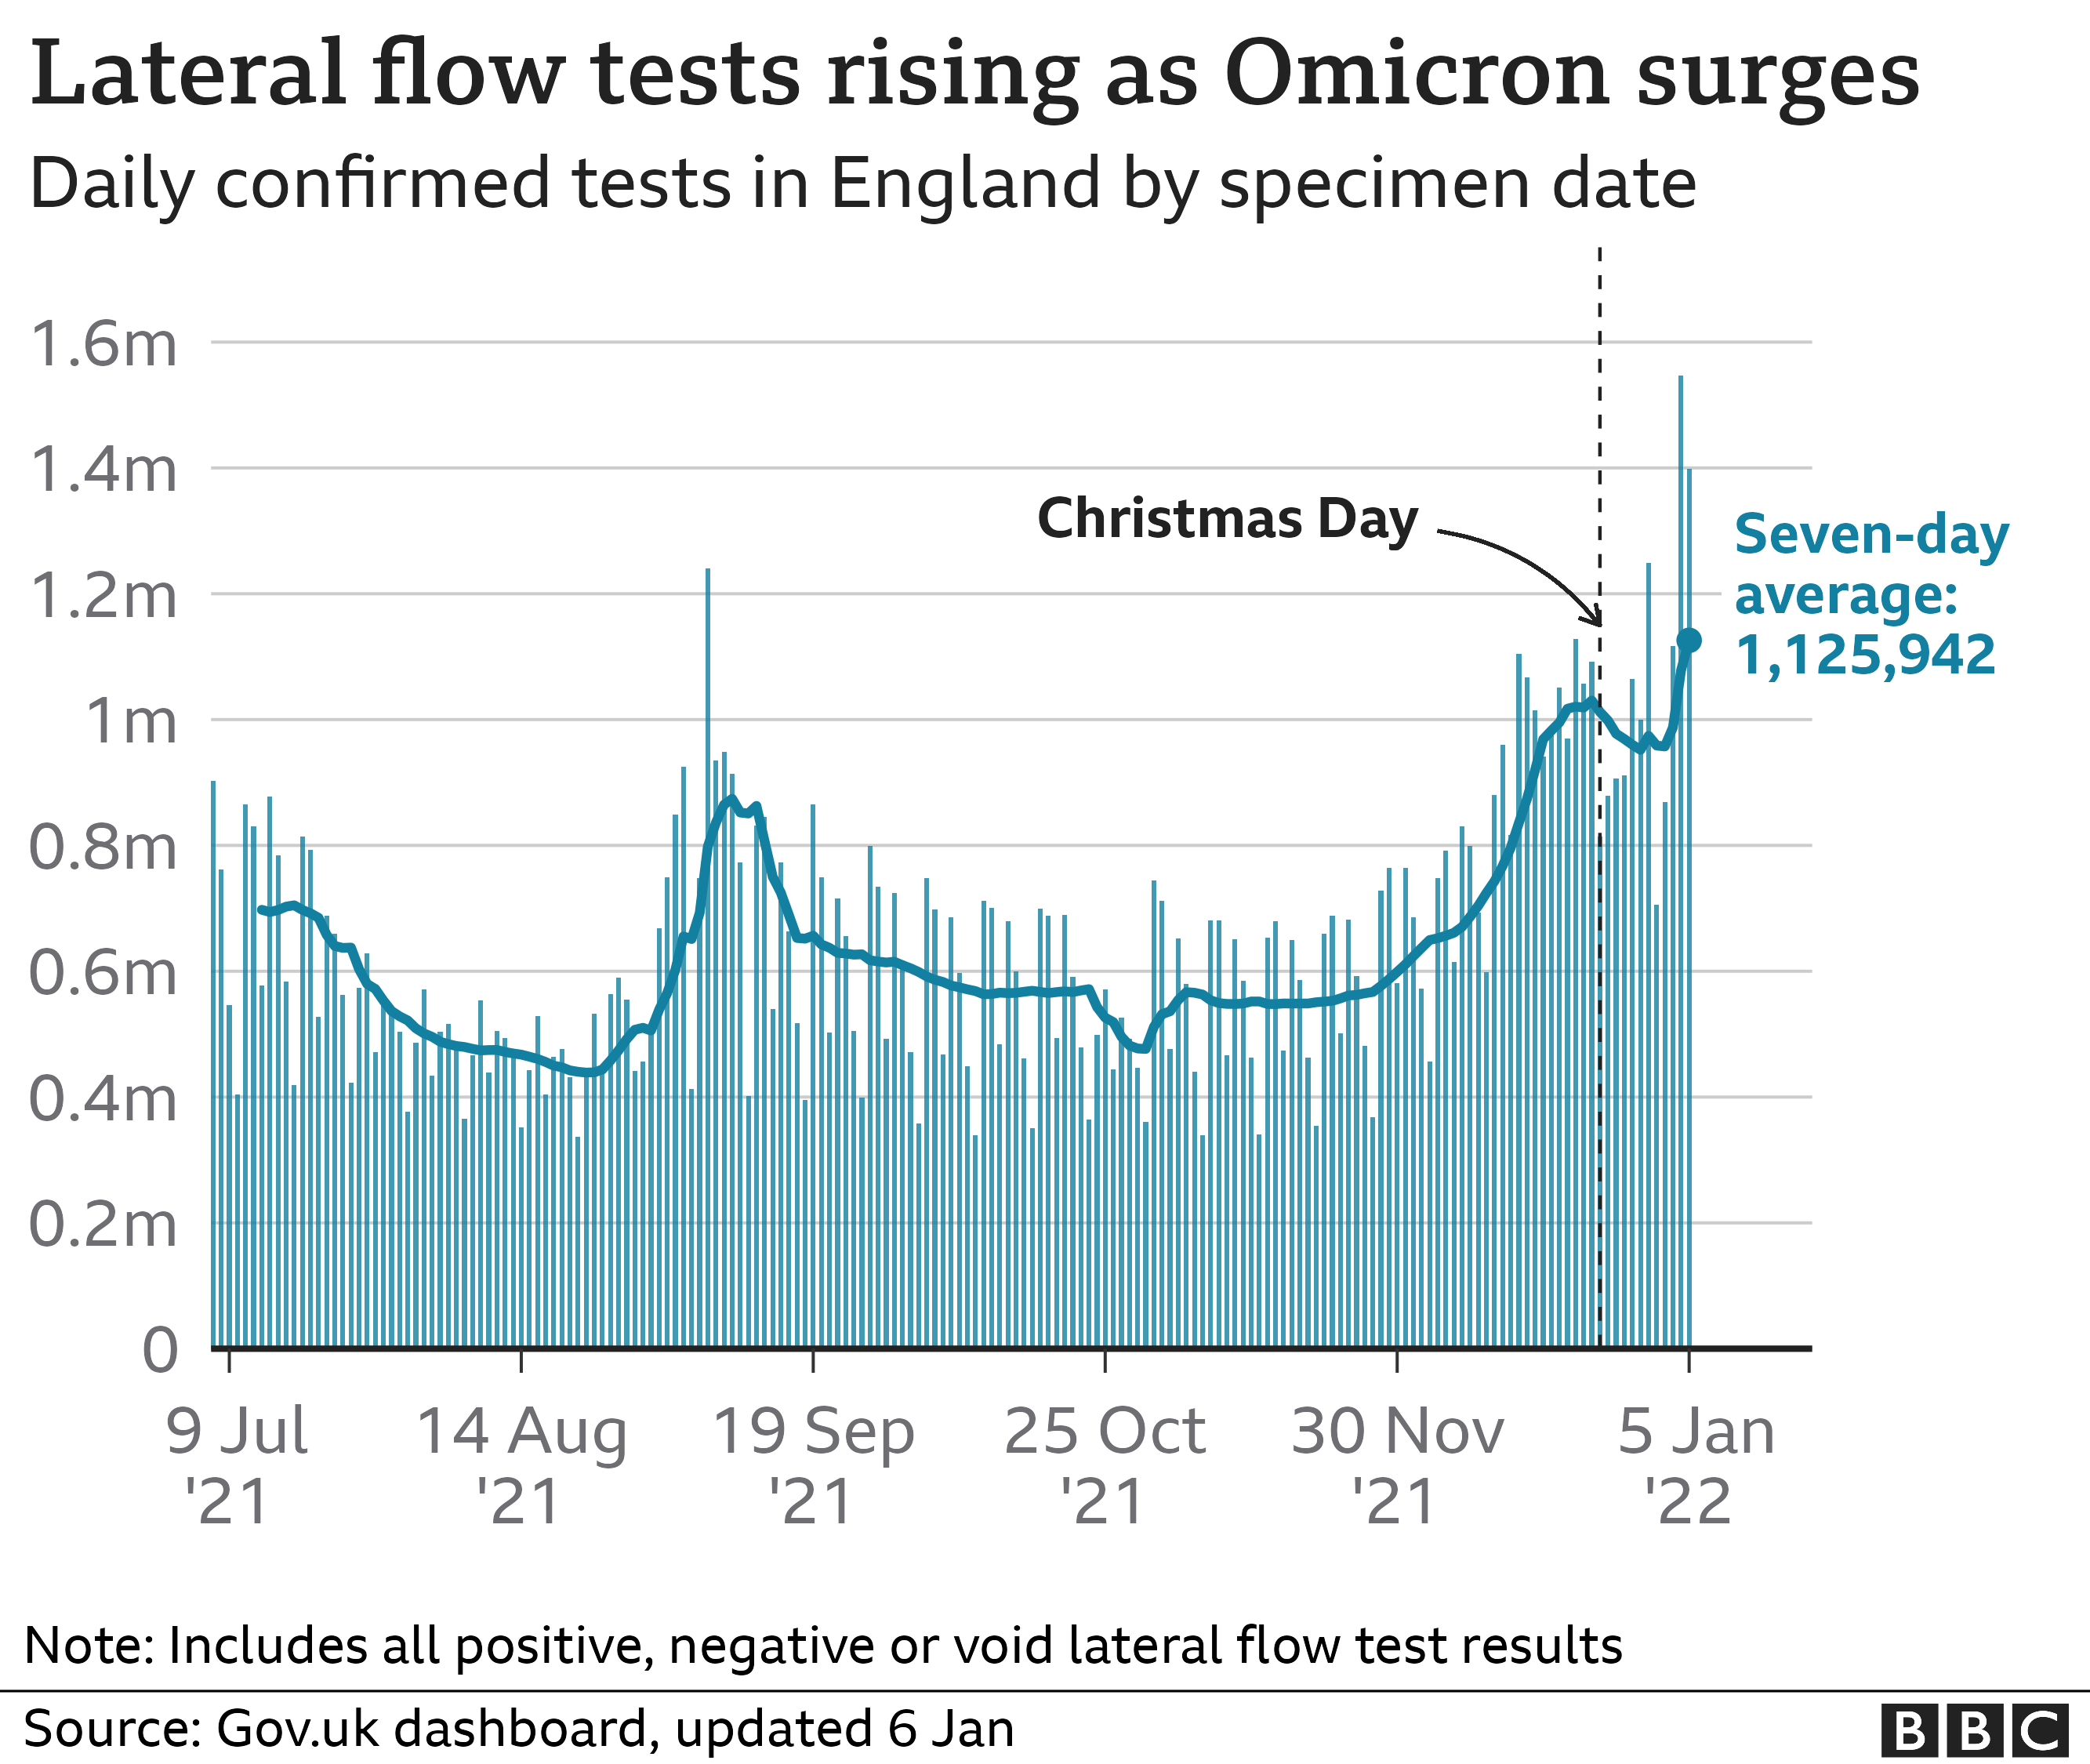 Lateral flow tests rising as Omicron surges